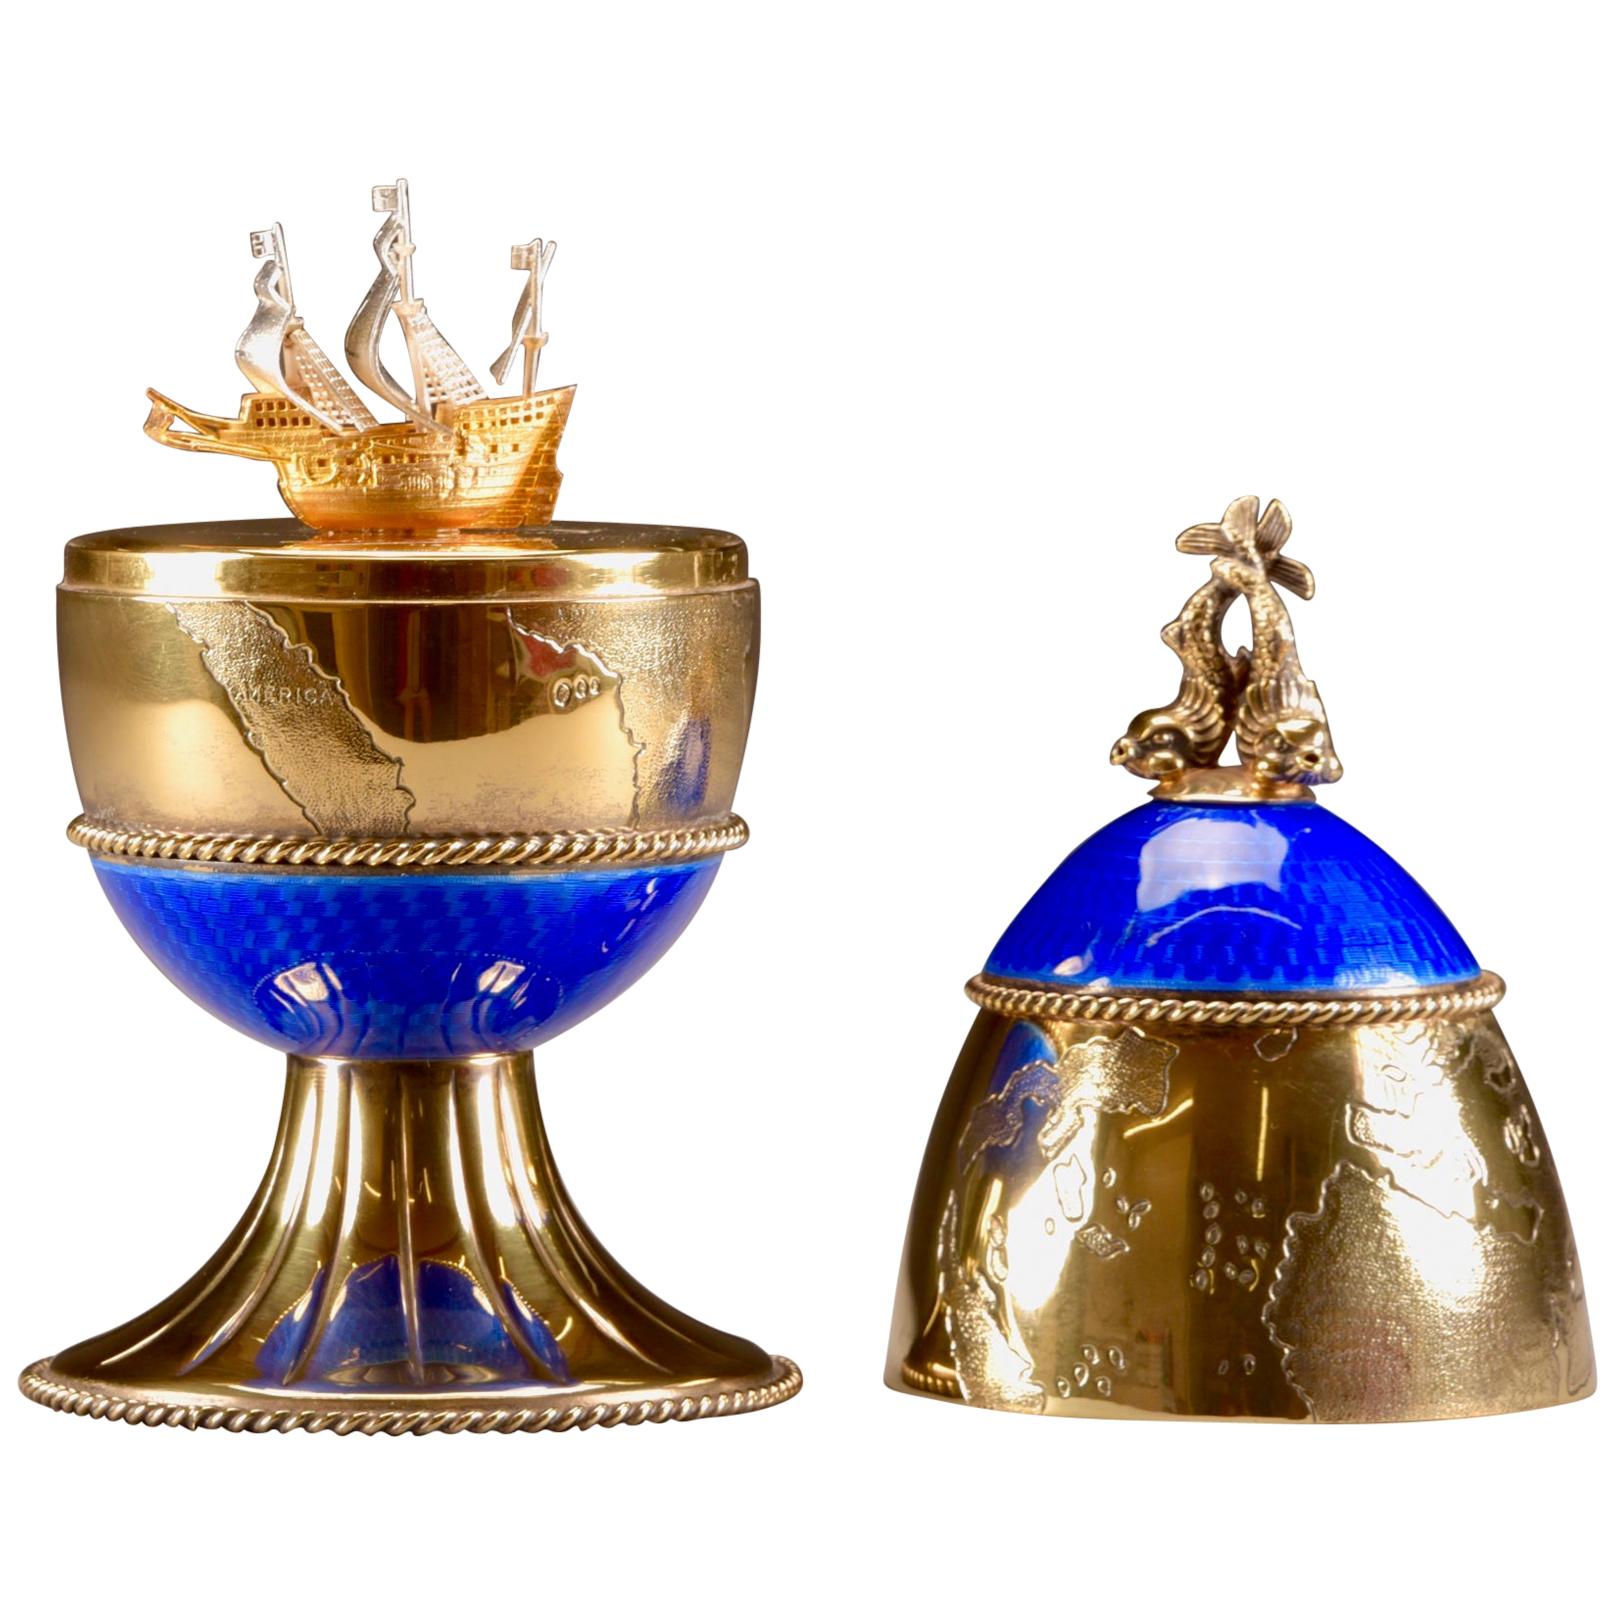 Theo Faberge "New world egg", St. Petersburg Collection, Silver 925/1000, 17/30 For Sale